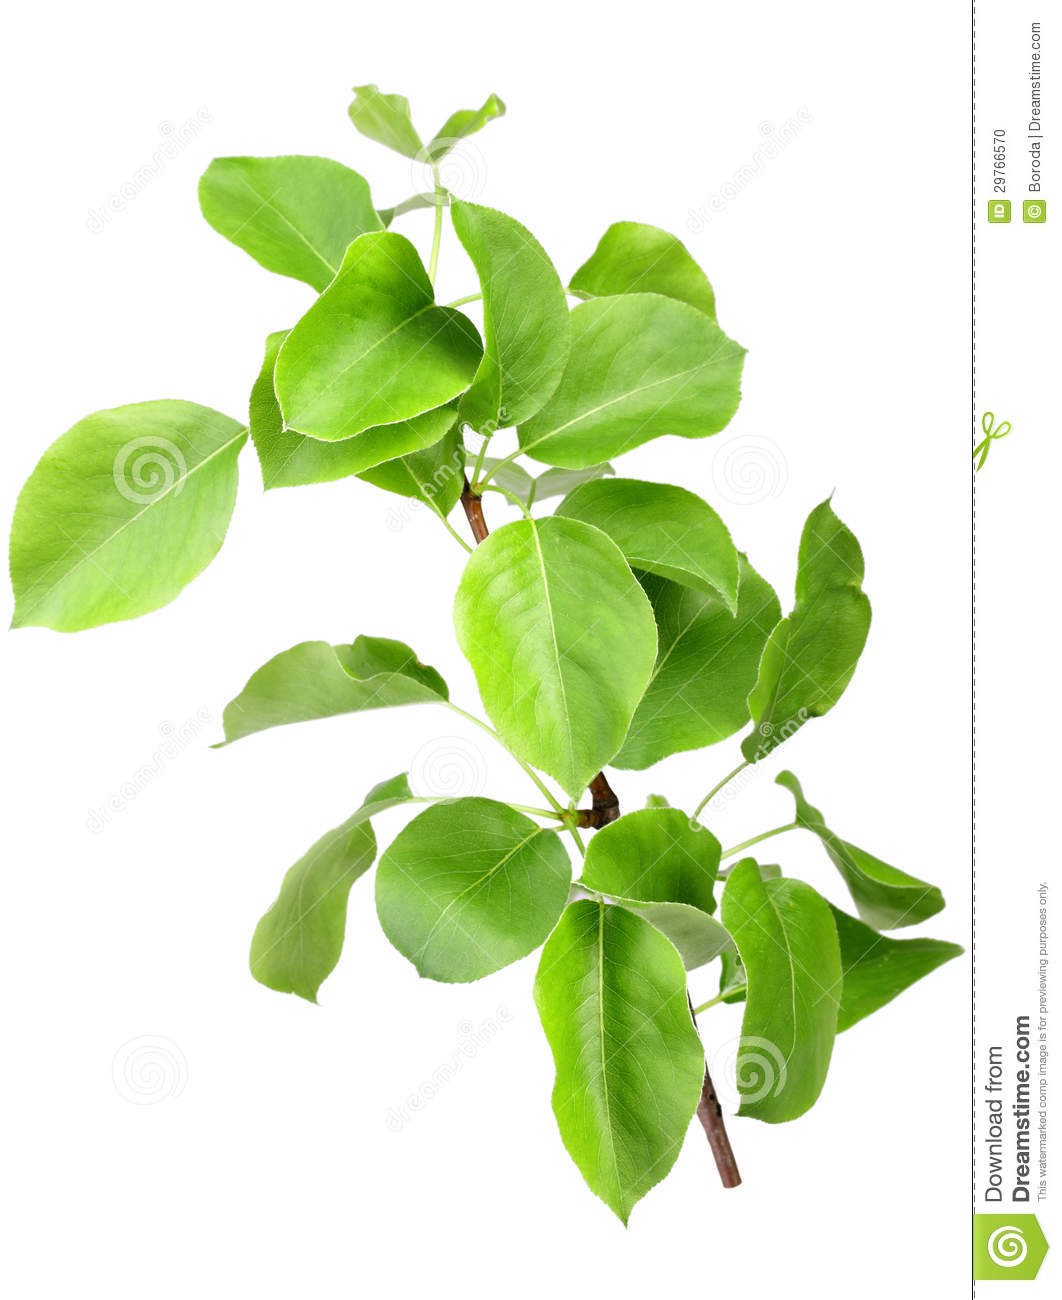 Single Young Sprout Of Apple Tree With Green Leafs  Isolated On White